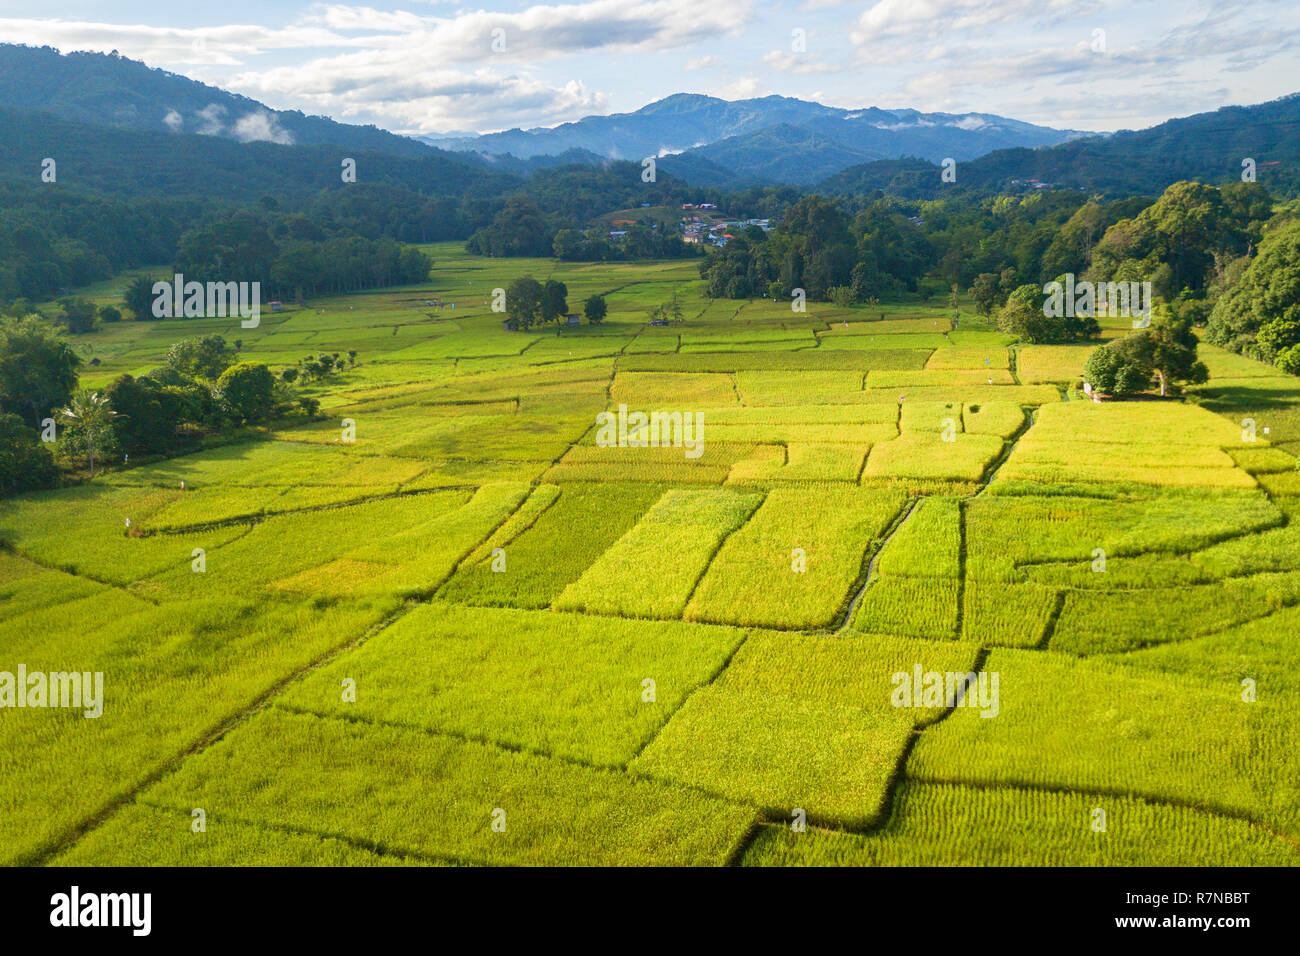 Paddy field valley in Sabah Malaysia Borneo Stock Photo